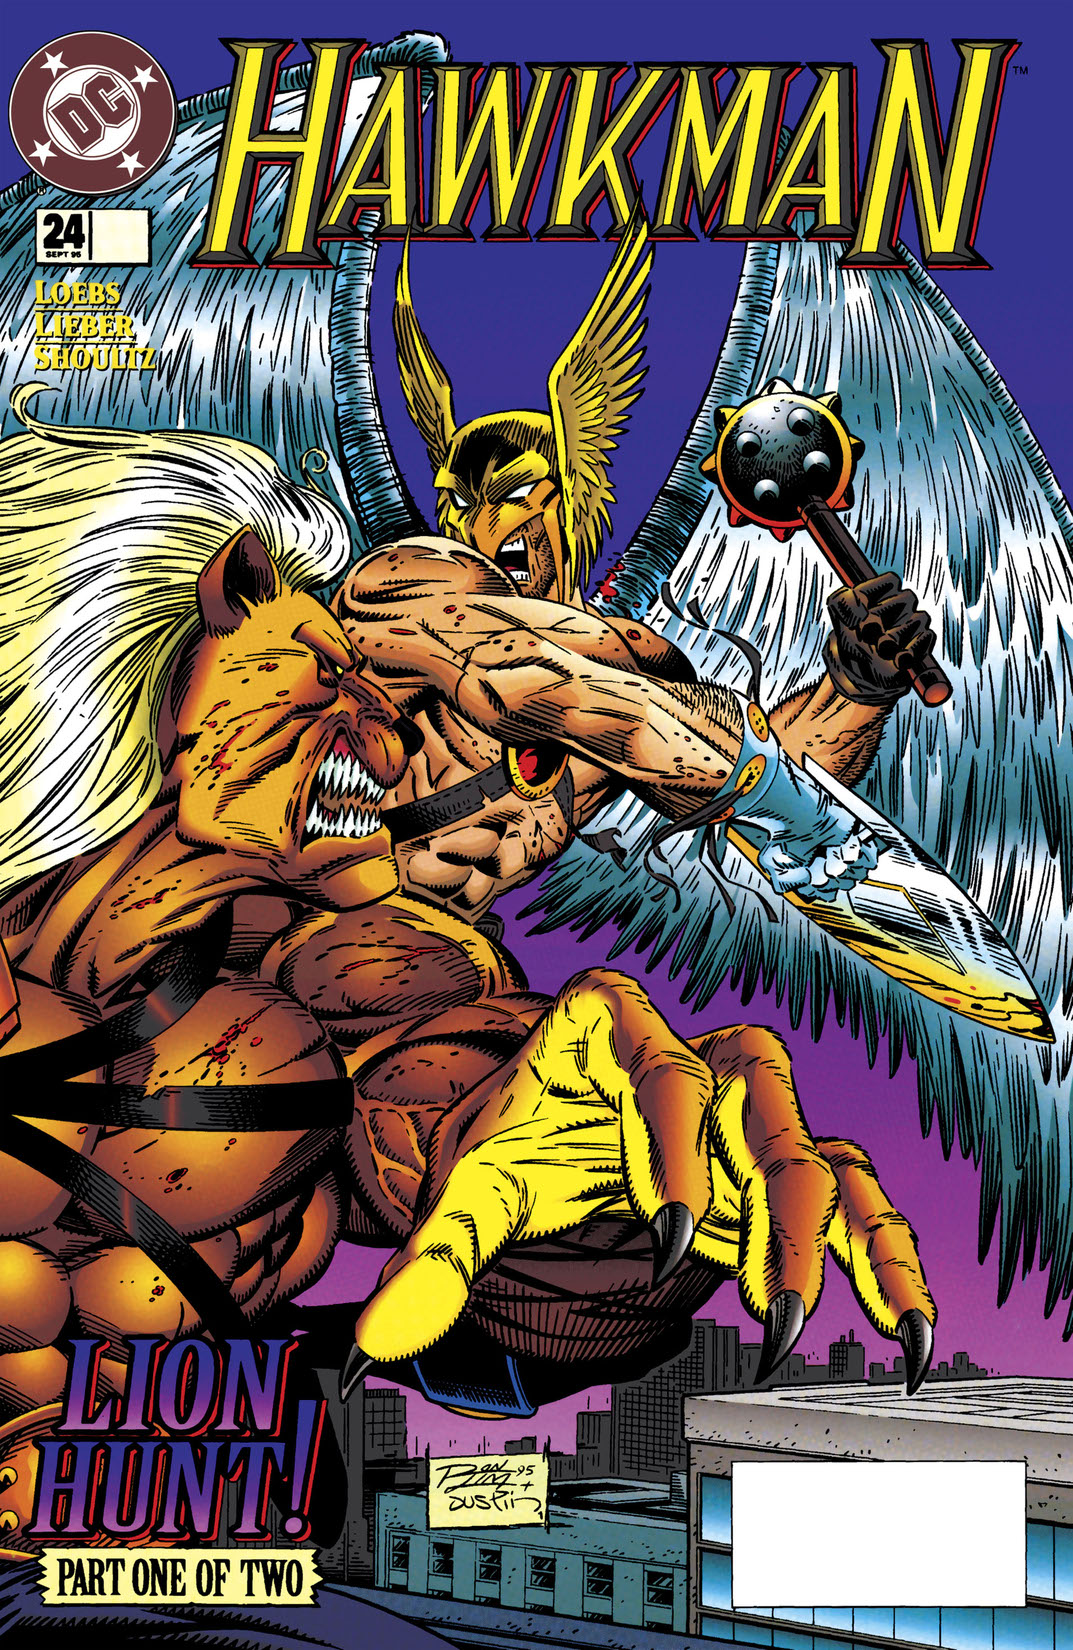 Hawkman (1993-1996) #24 preview images